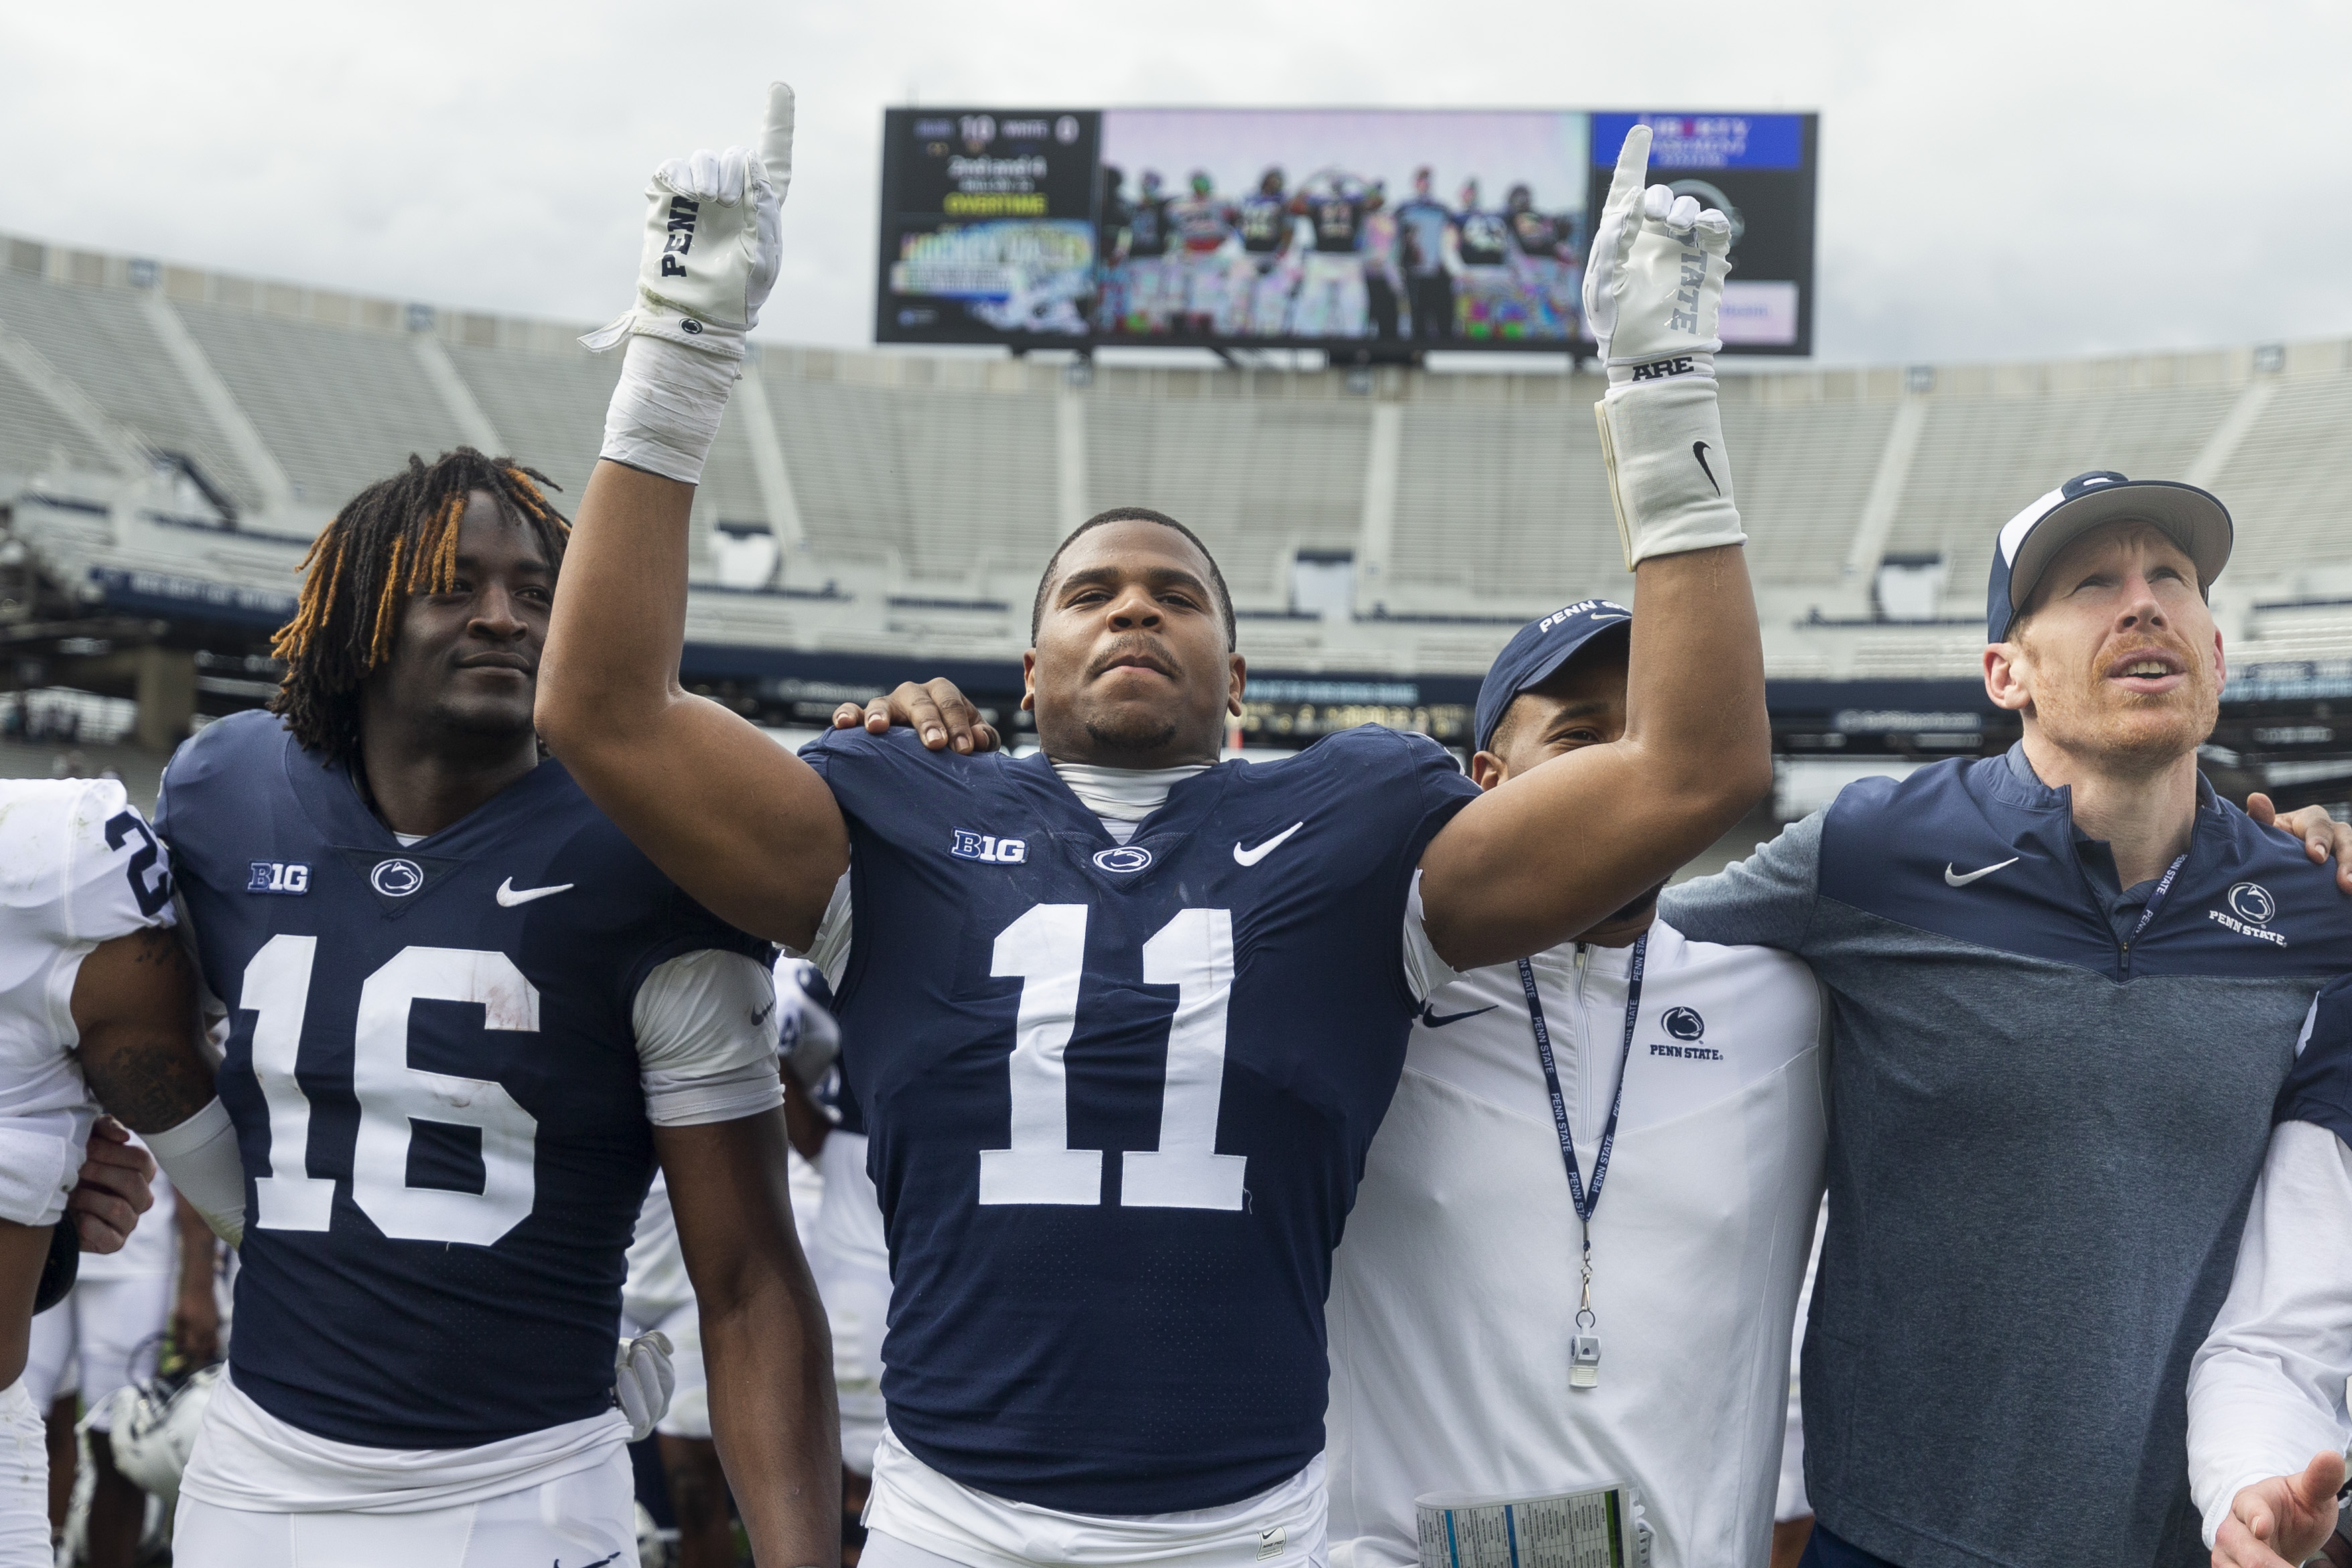 One Penn State player who will have a new jersey number this year